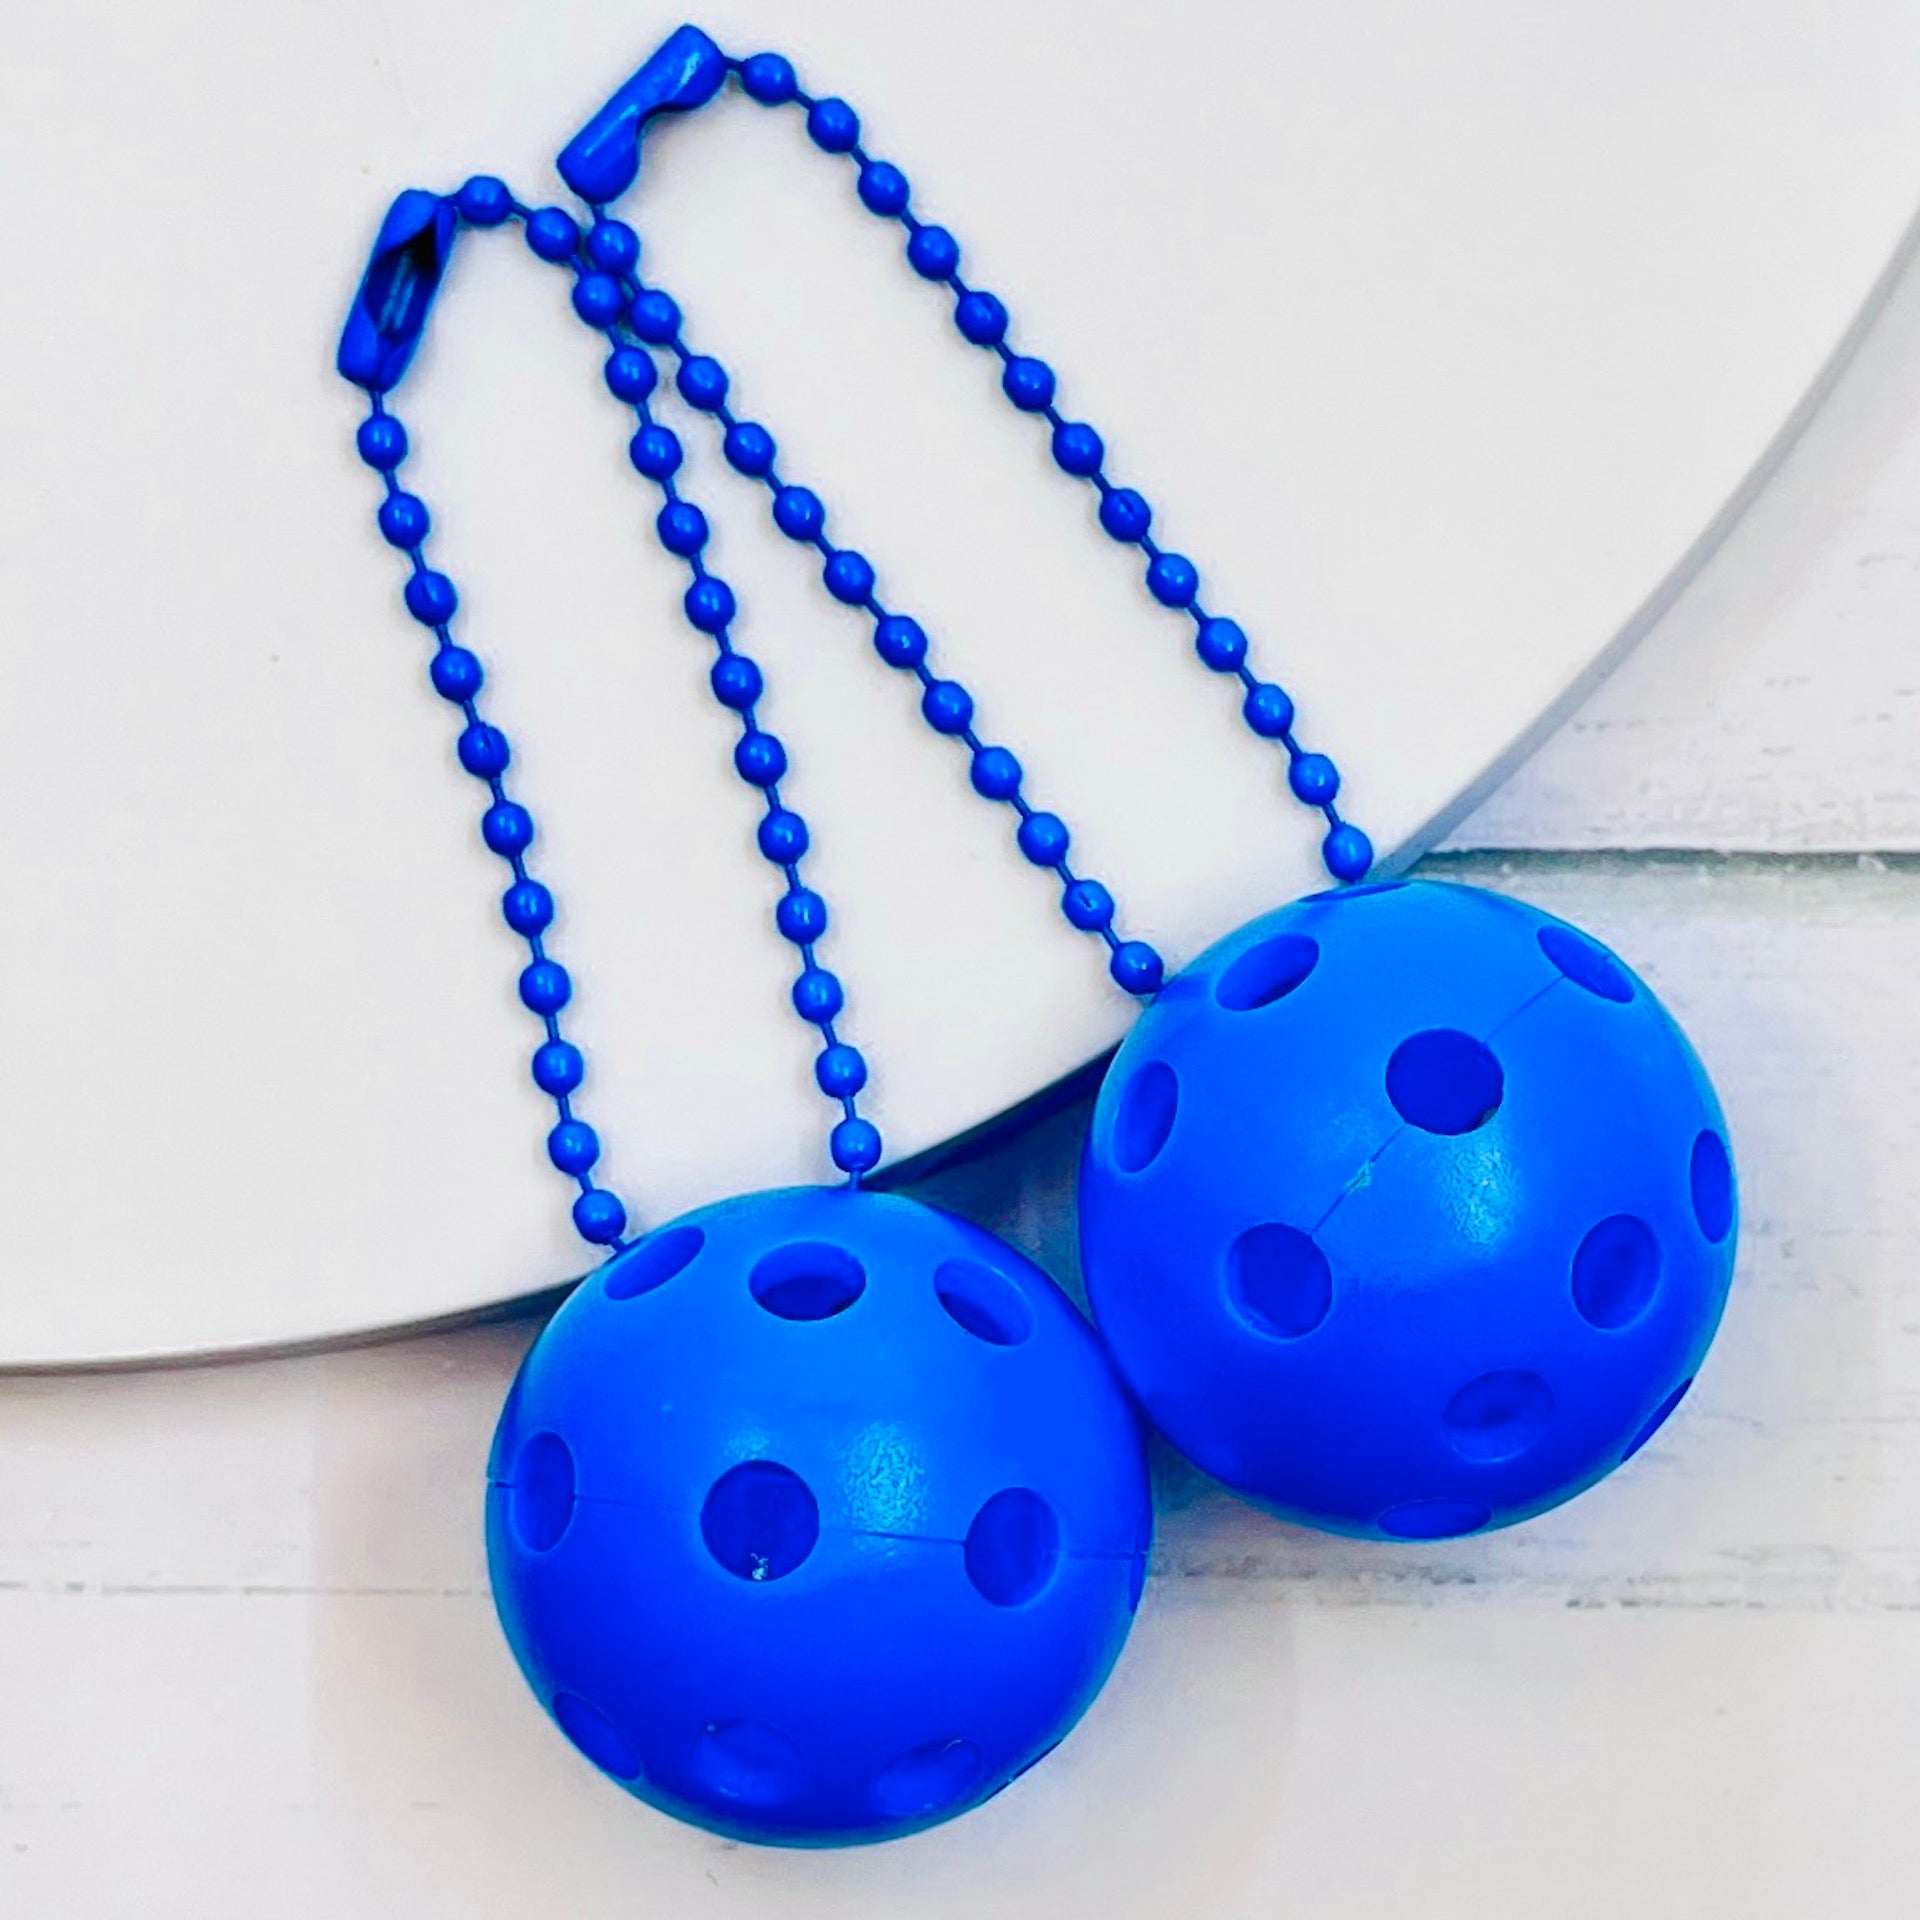 Micro Pickleball Bag Tags/Pulls (Set of 2)  Each order gets you 2 of the cutest little pickleball and chain! They measure about 1 inch and are used as bag tag markers. Fun for any bag, especially your pickleball bag!! The balls come in 4 colors: Red, Green, Blue, and Yellow. They now also come with matching chain colors!! Choose from 4 fun colors.